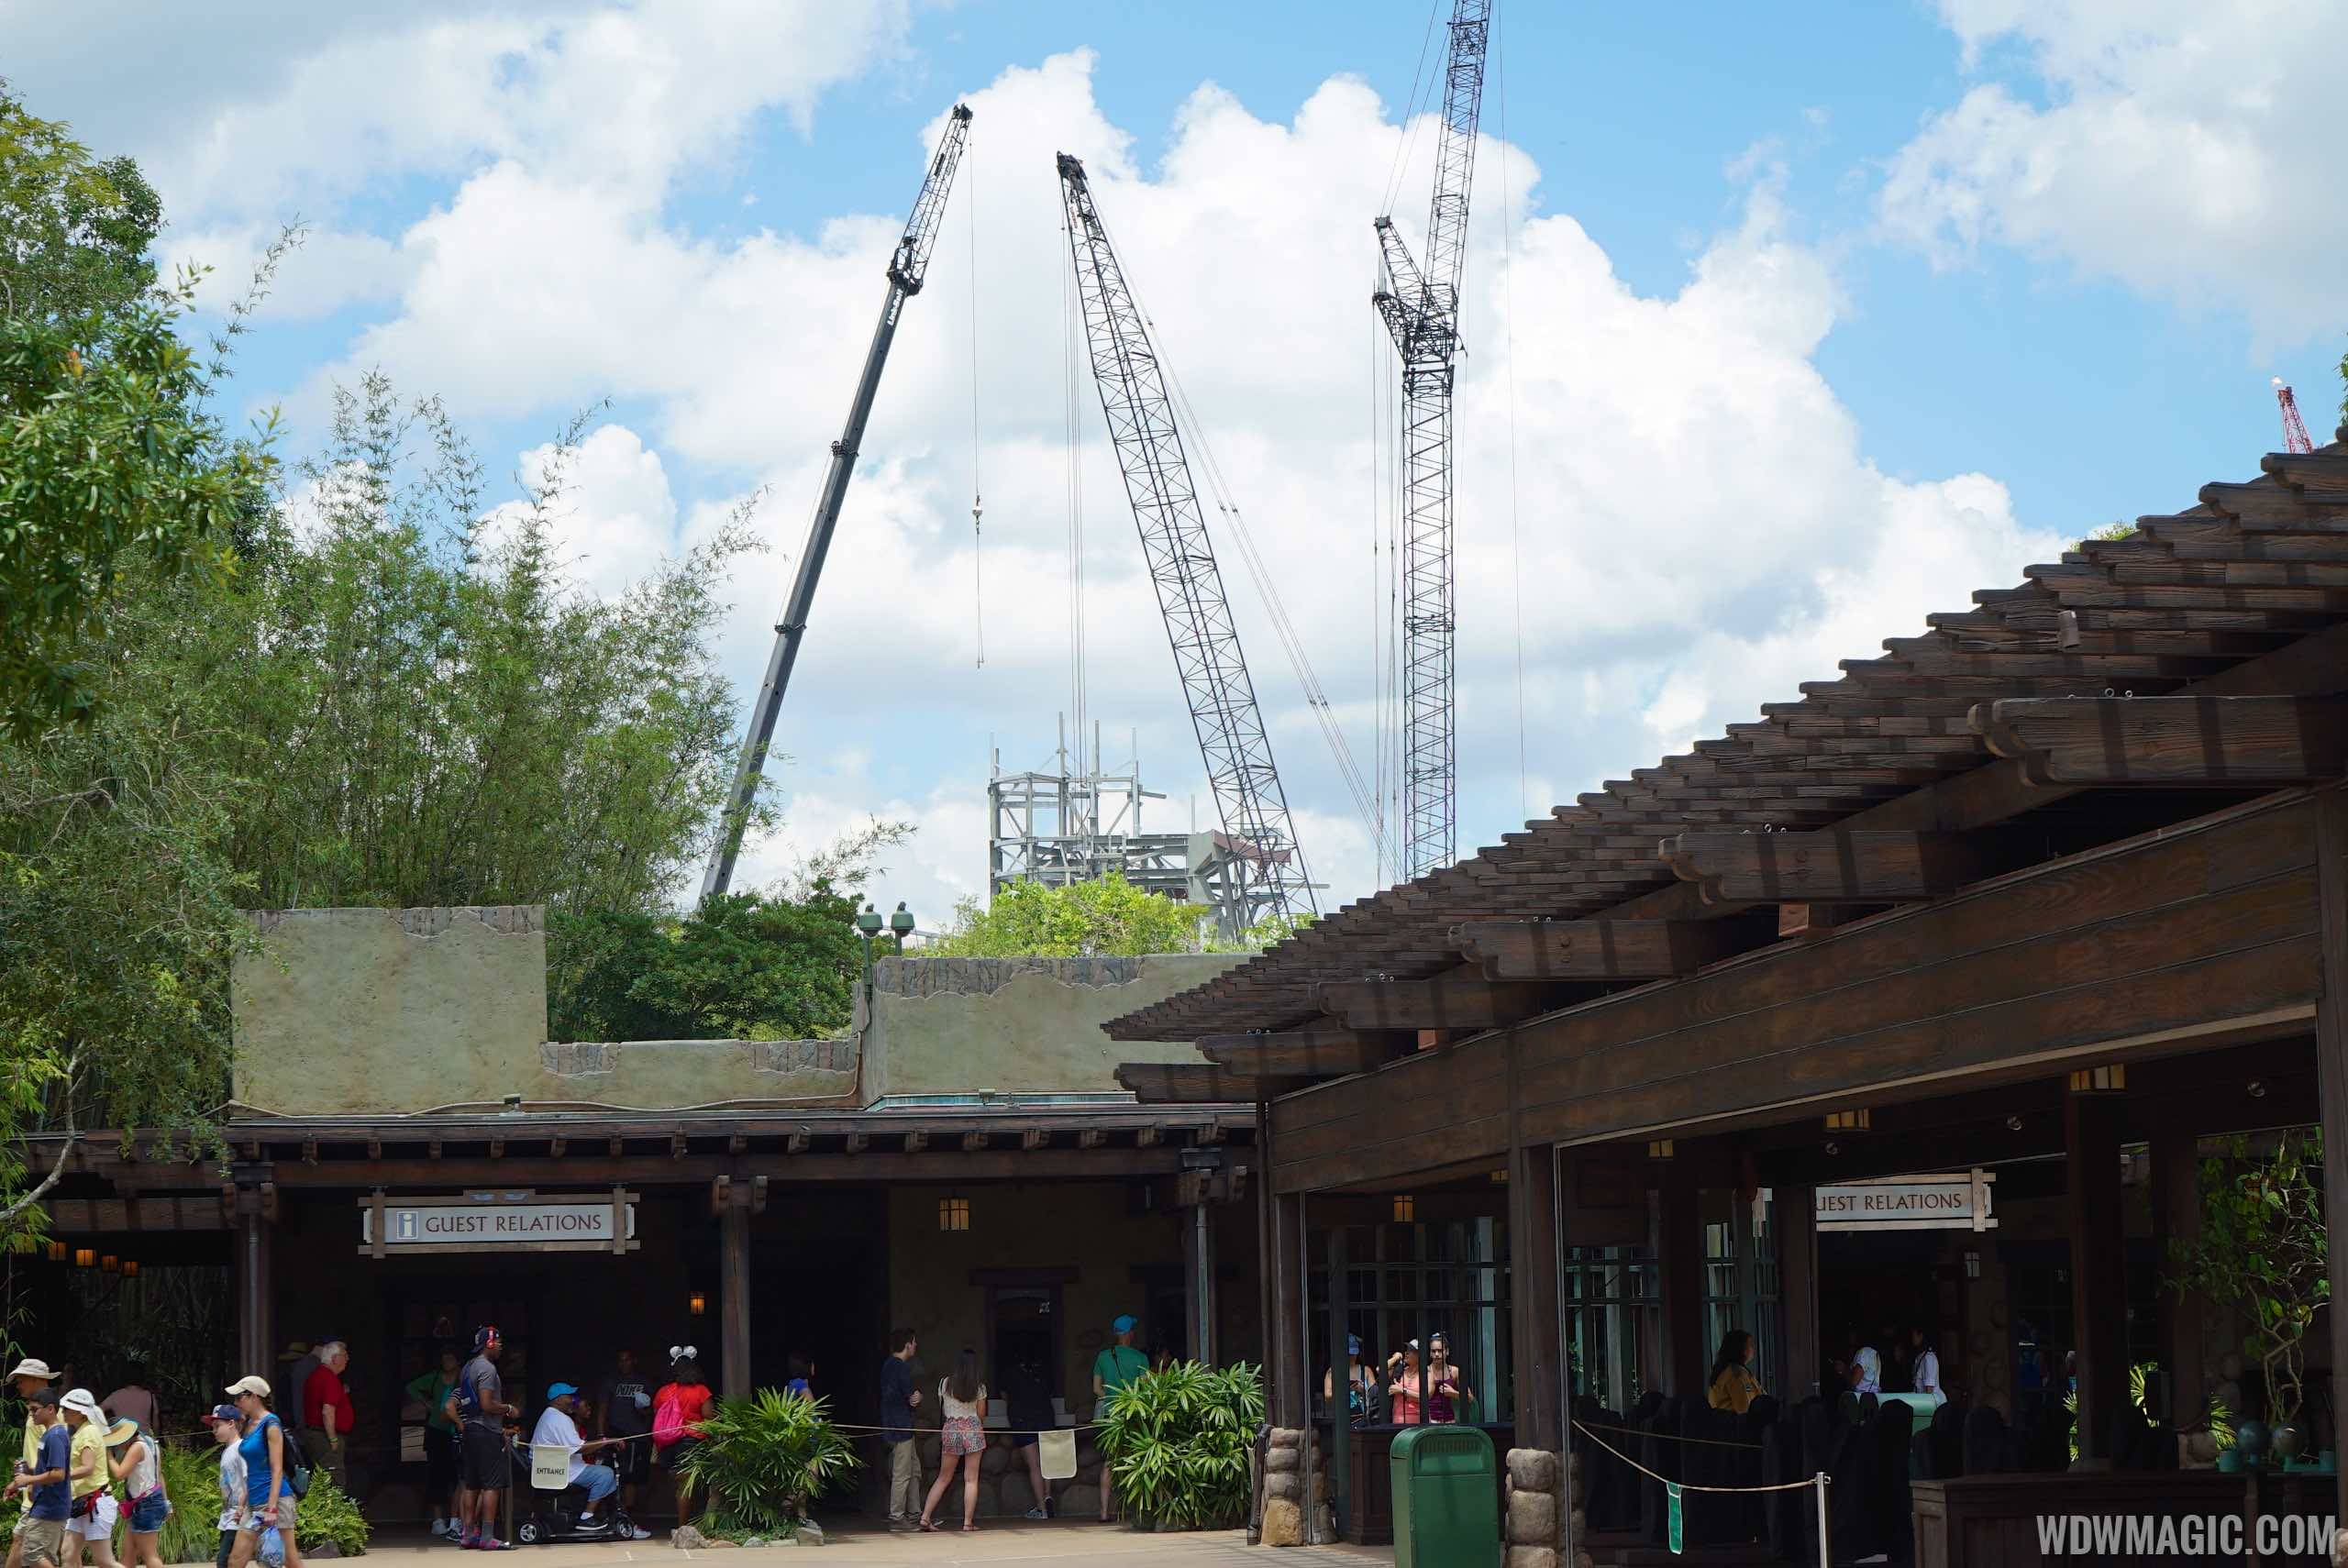 PHOTOS - AVATAR construction now visible from inside Disney's Animal Kingdom